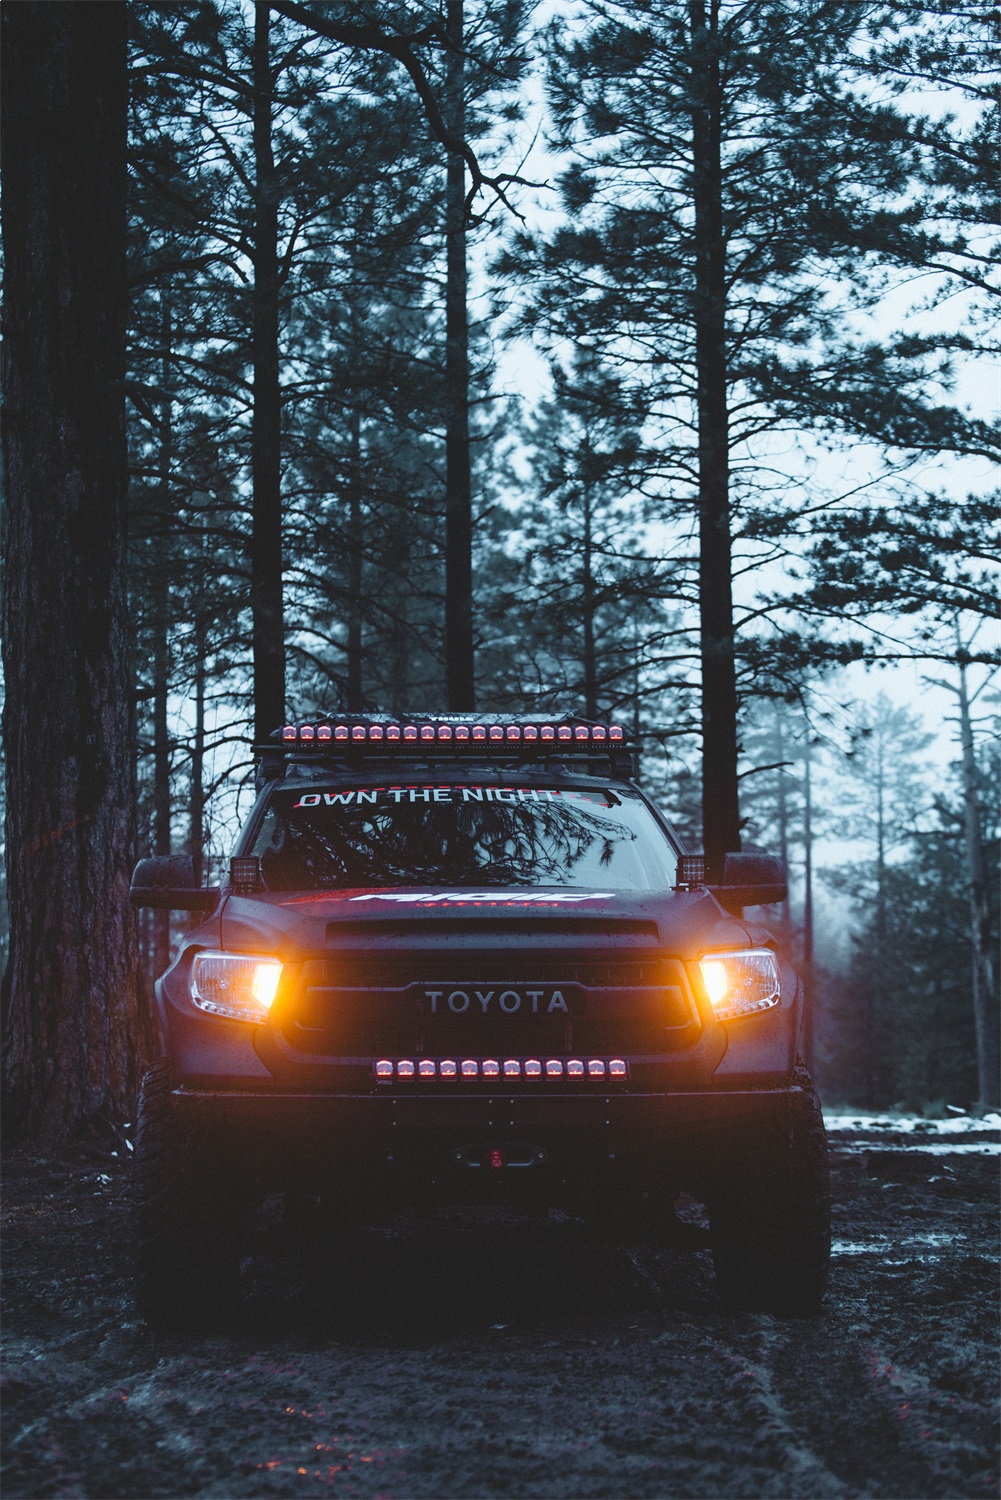 Picture of RIGID Industries 240413 Rigid Adapt Led Light Bar With 8 Beam Patterns, Gps And Rgb-W Backlight, 40 Inch